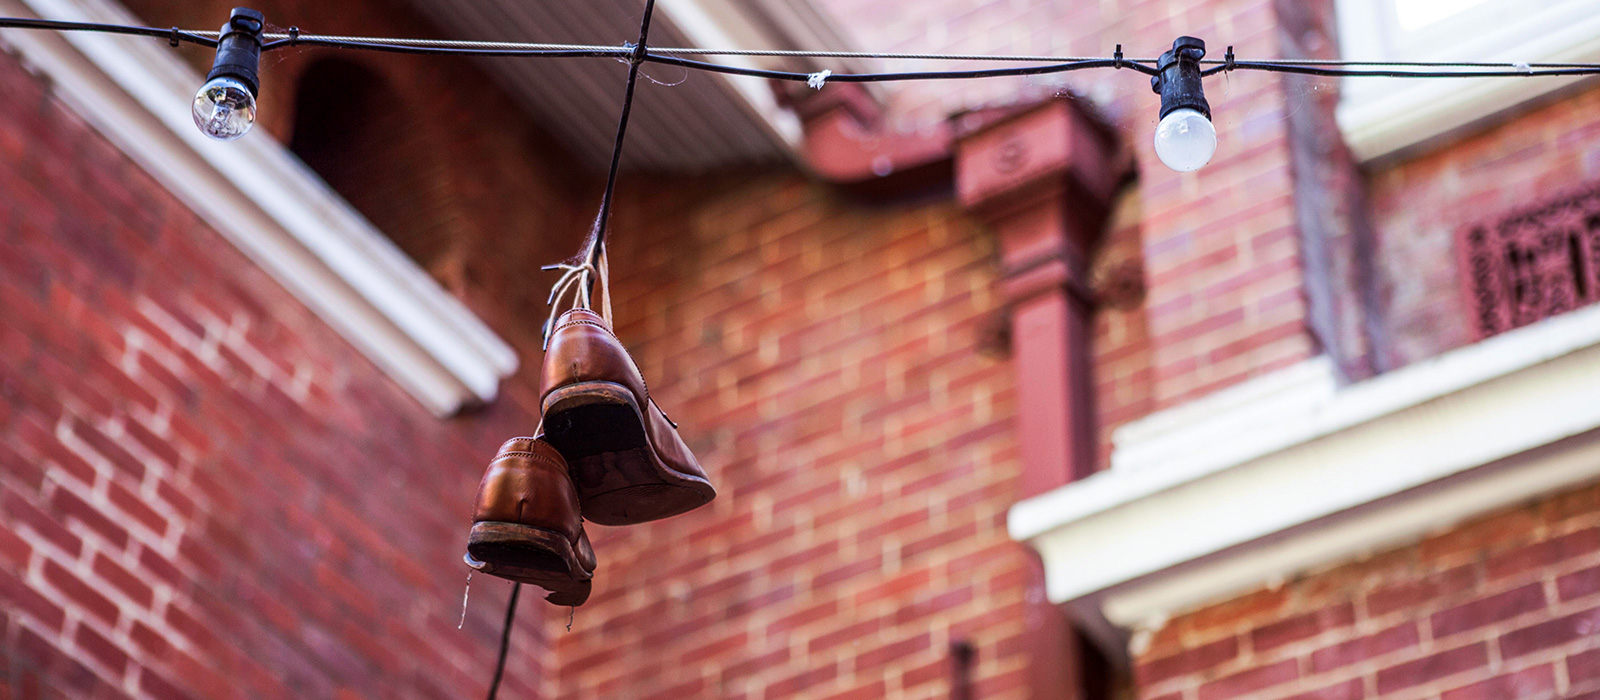 Shoes hanging from electrical wire